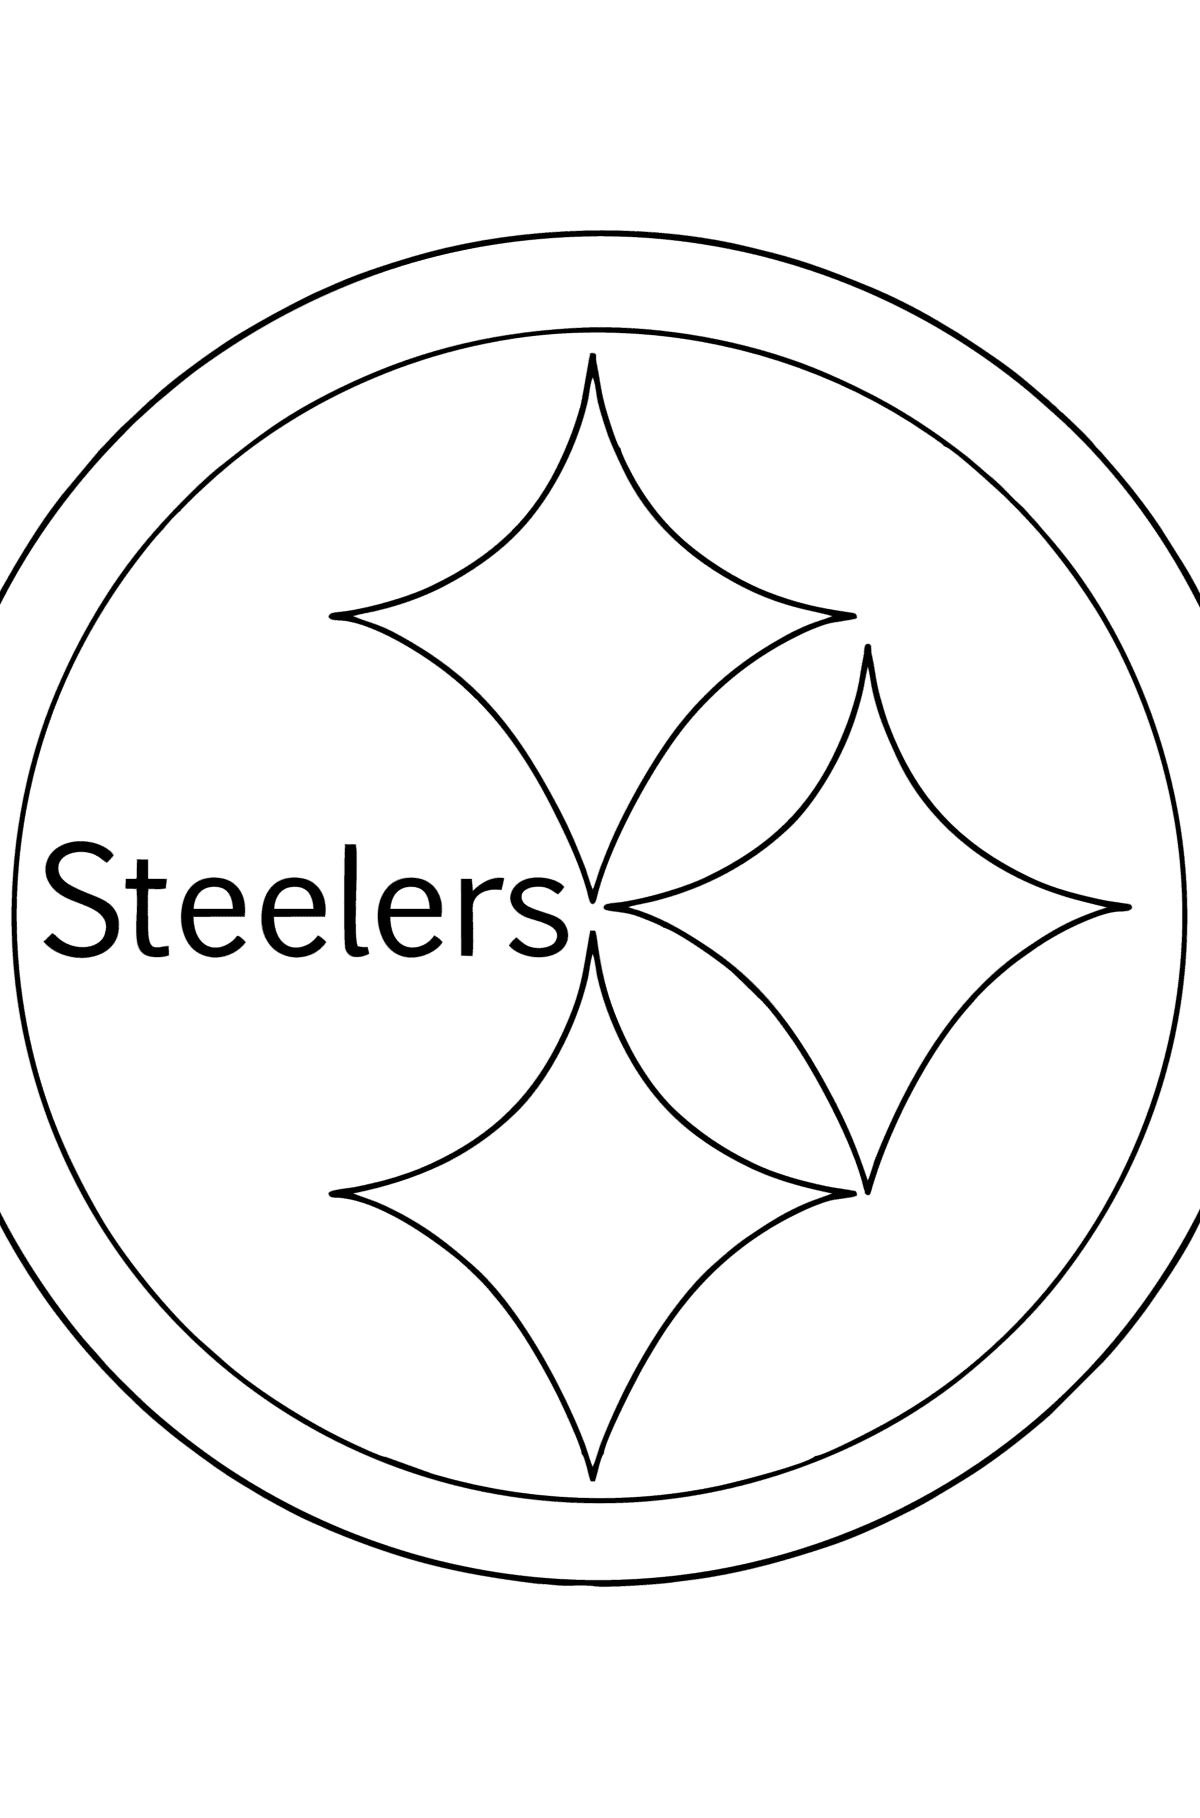 Nfl pittsburgh steelers ñoloring page â online and print for free